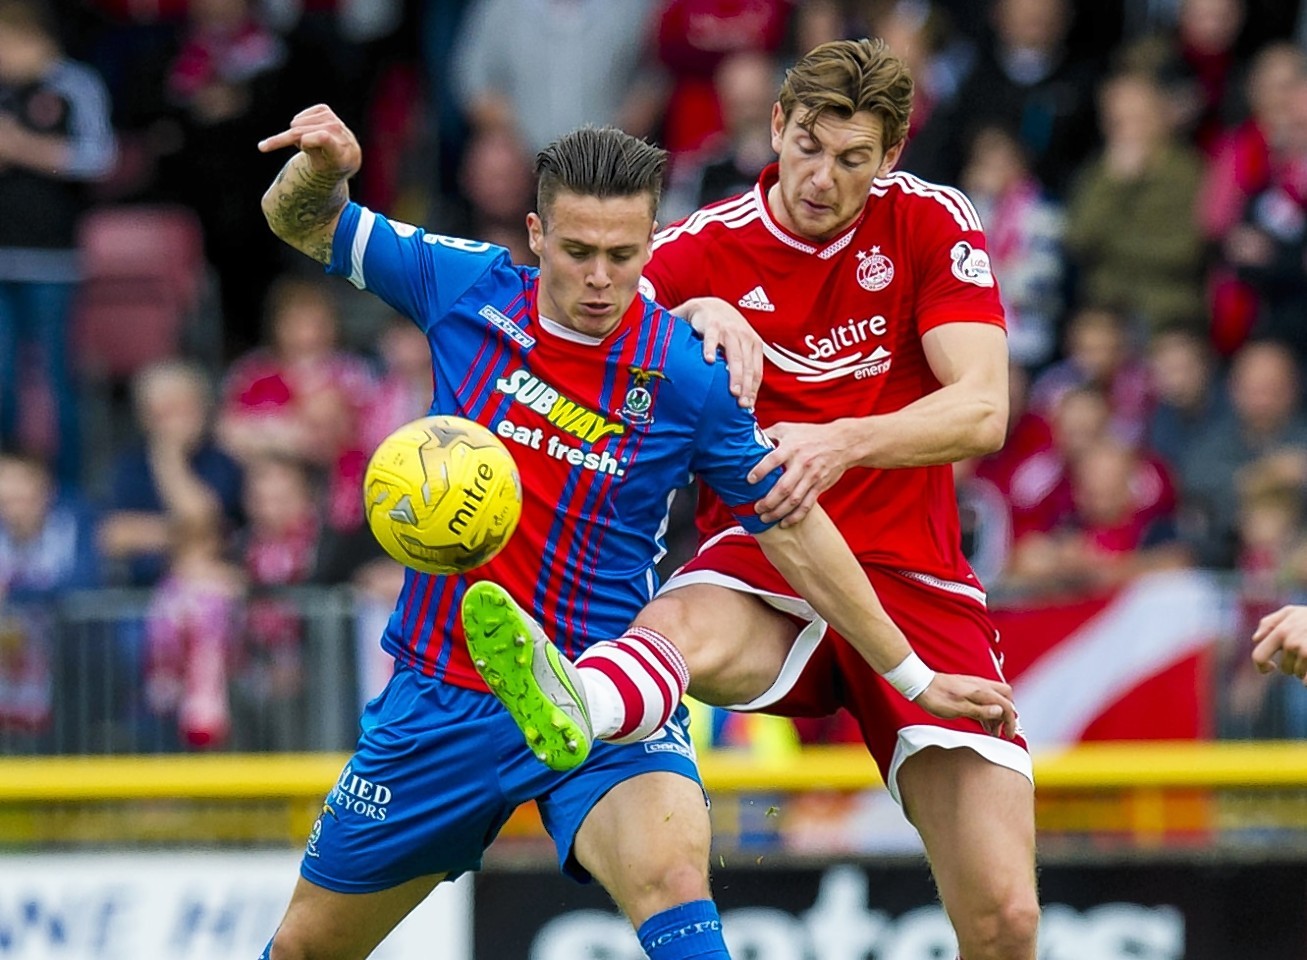 Miles Story looks likely to miss out for Caley Thistle 